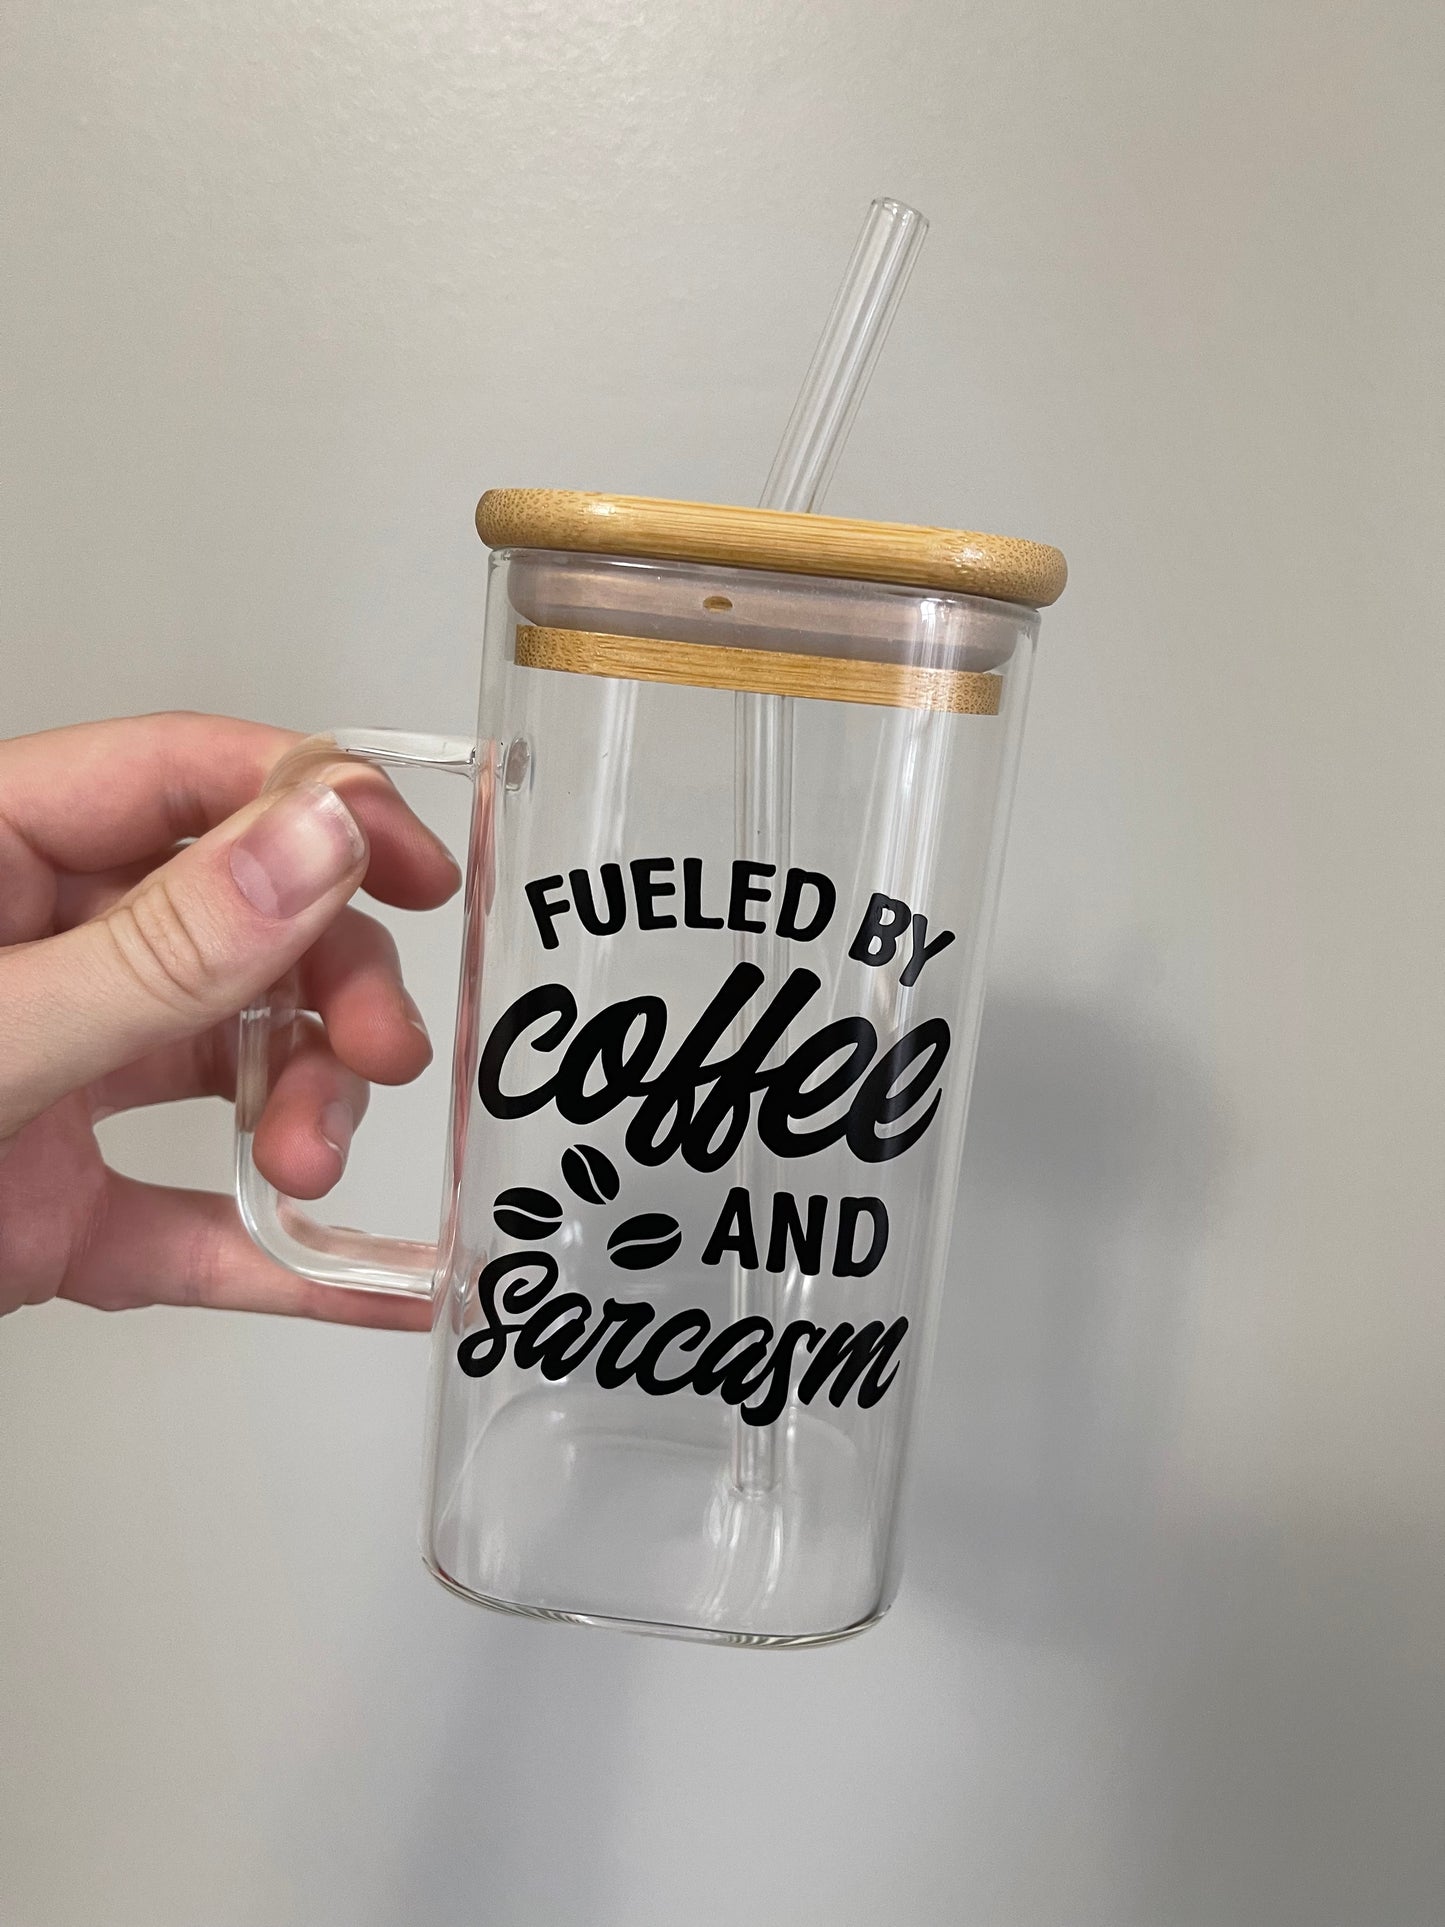 Fueled By Ice Coffee and Sarcasm Square Glass Cup